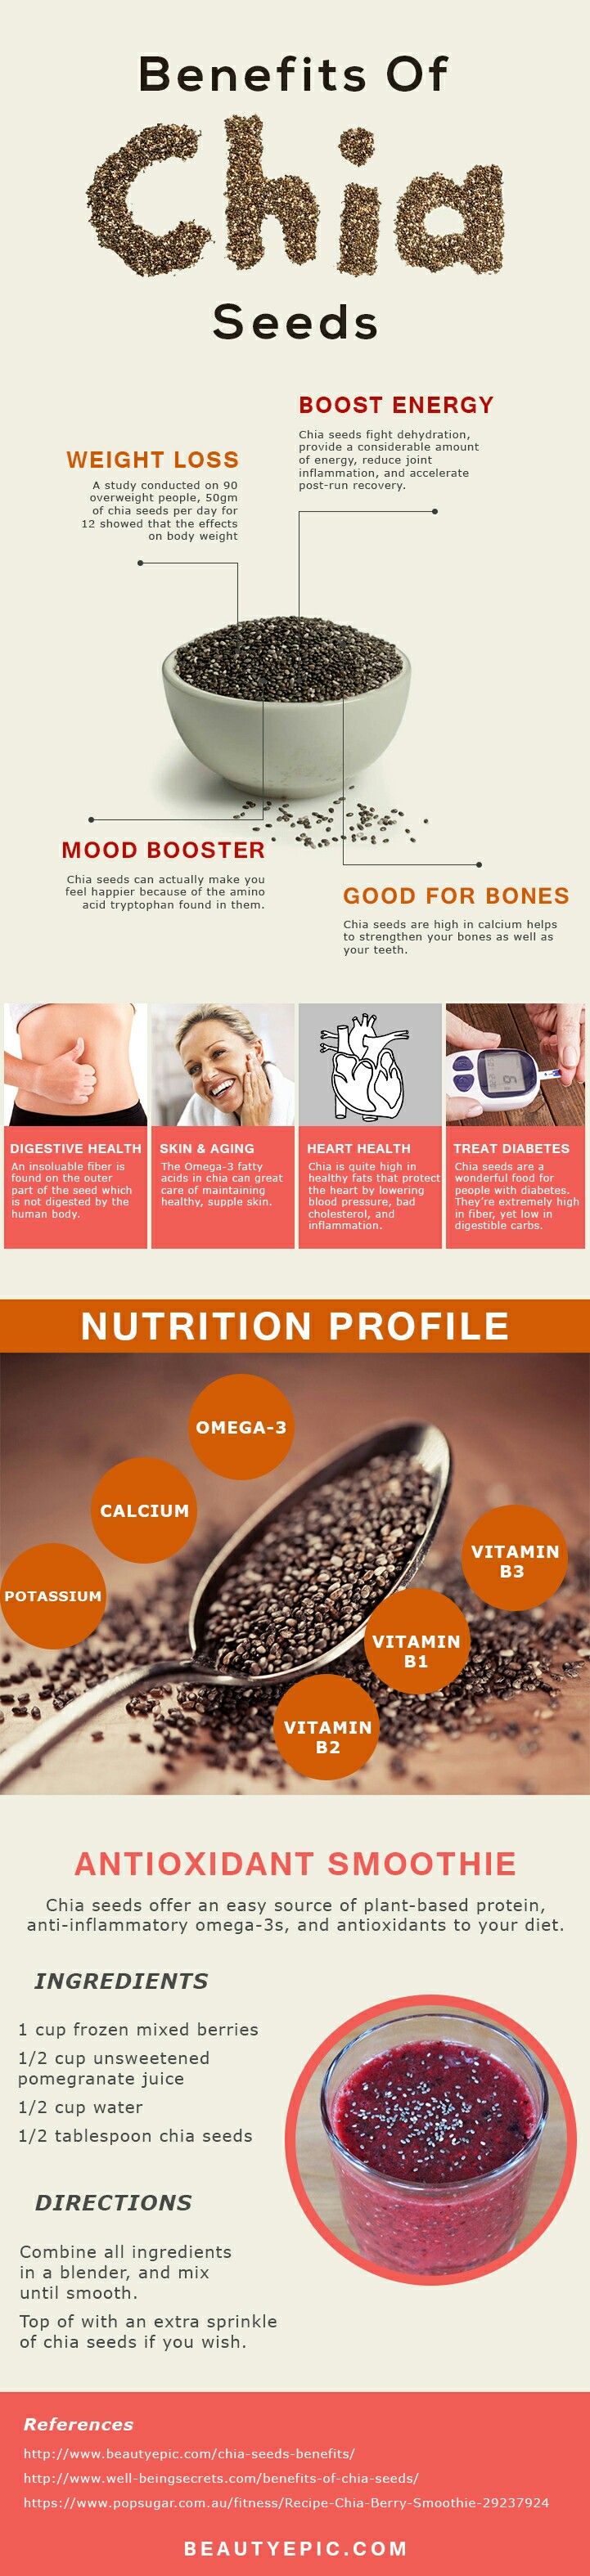 Nutrition Facts And Health Benefits Of Chia Seeds Infographic